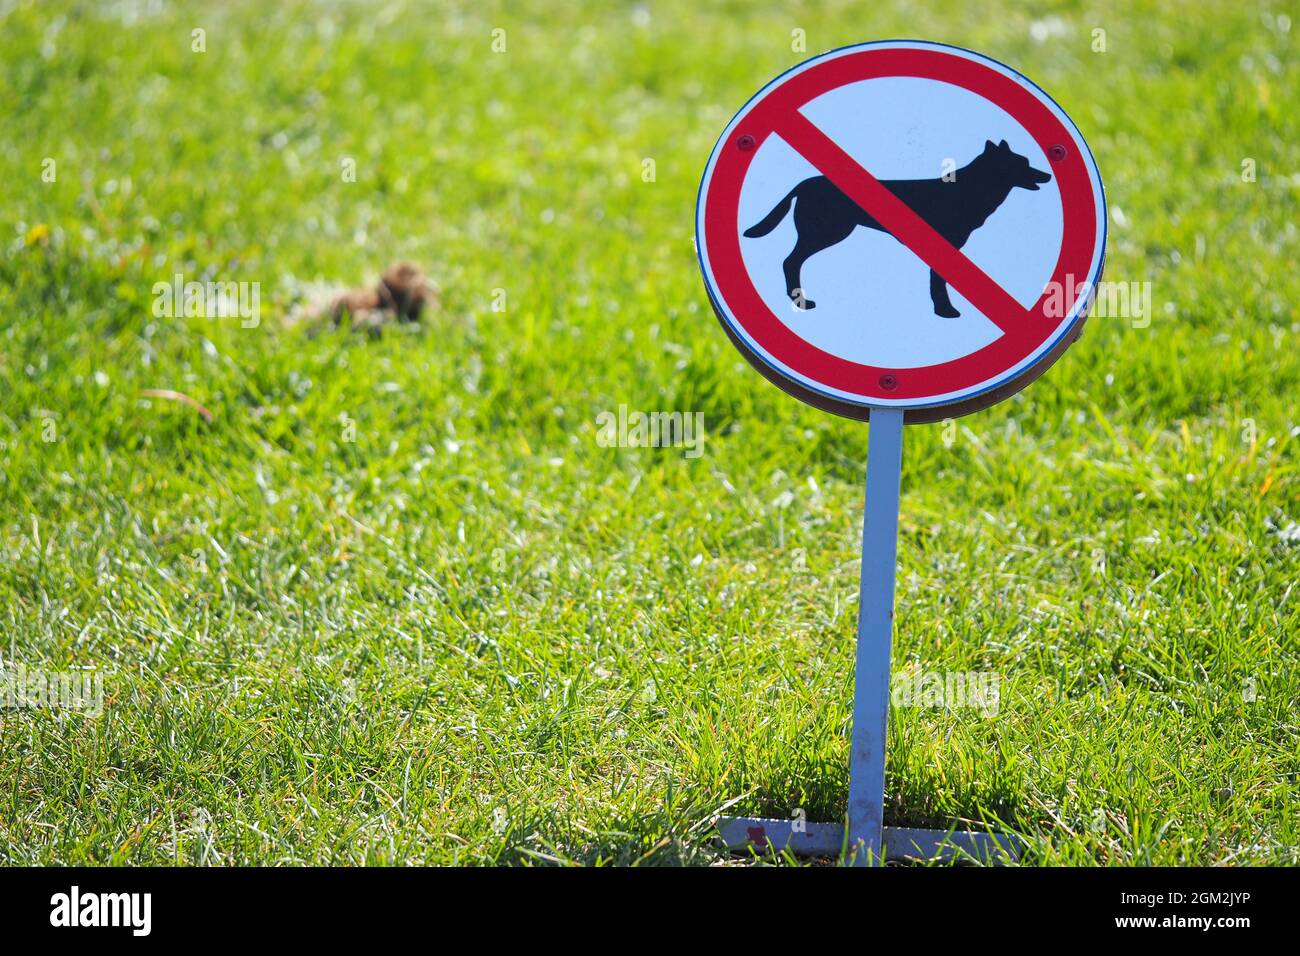 Dog walking is prohibited. Warning sign for dog breeders. Stock Photo